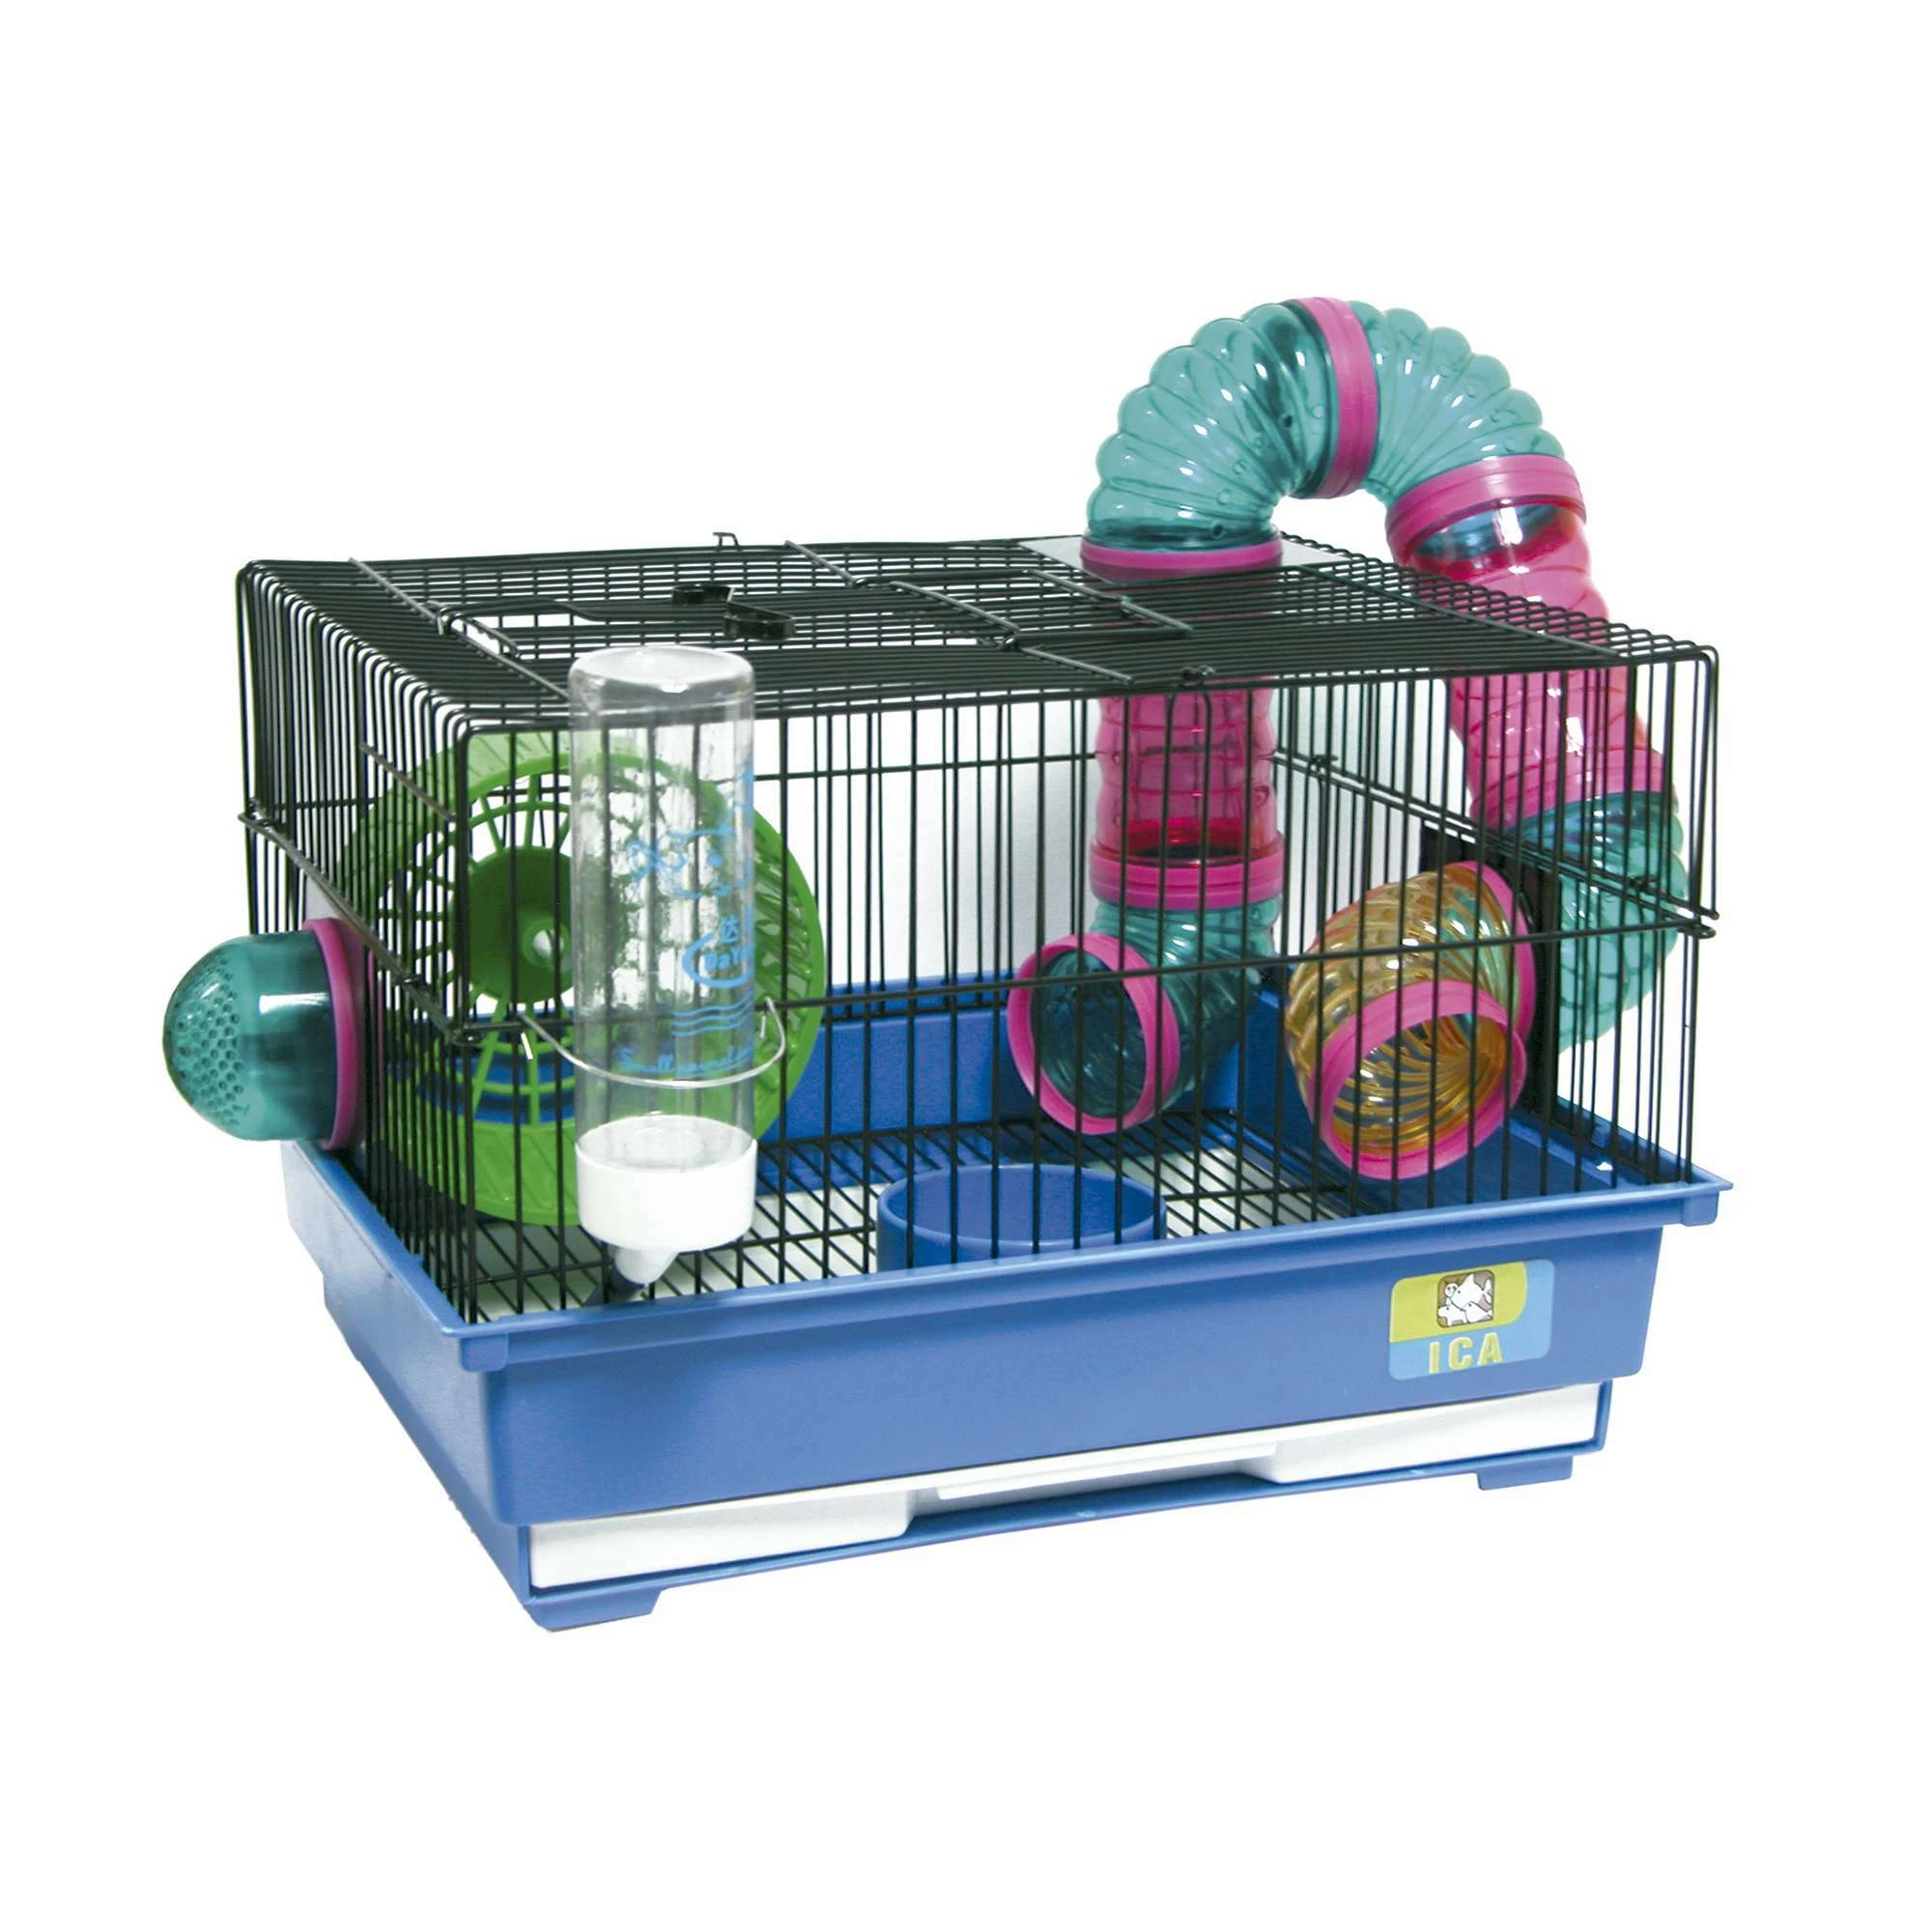 Hamsterland Cage In Blue And Black - Dog Accessories - AliExpress